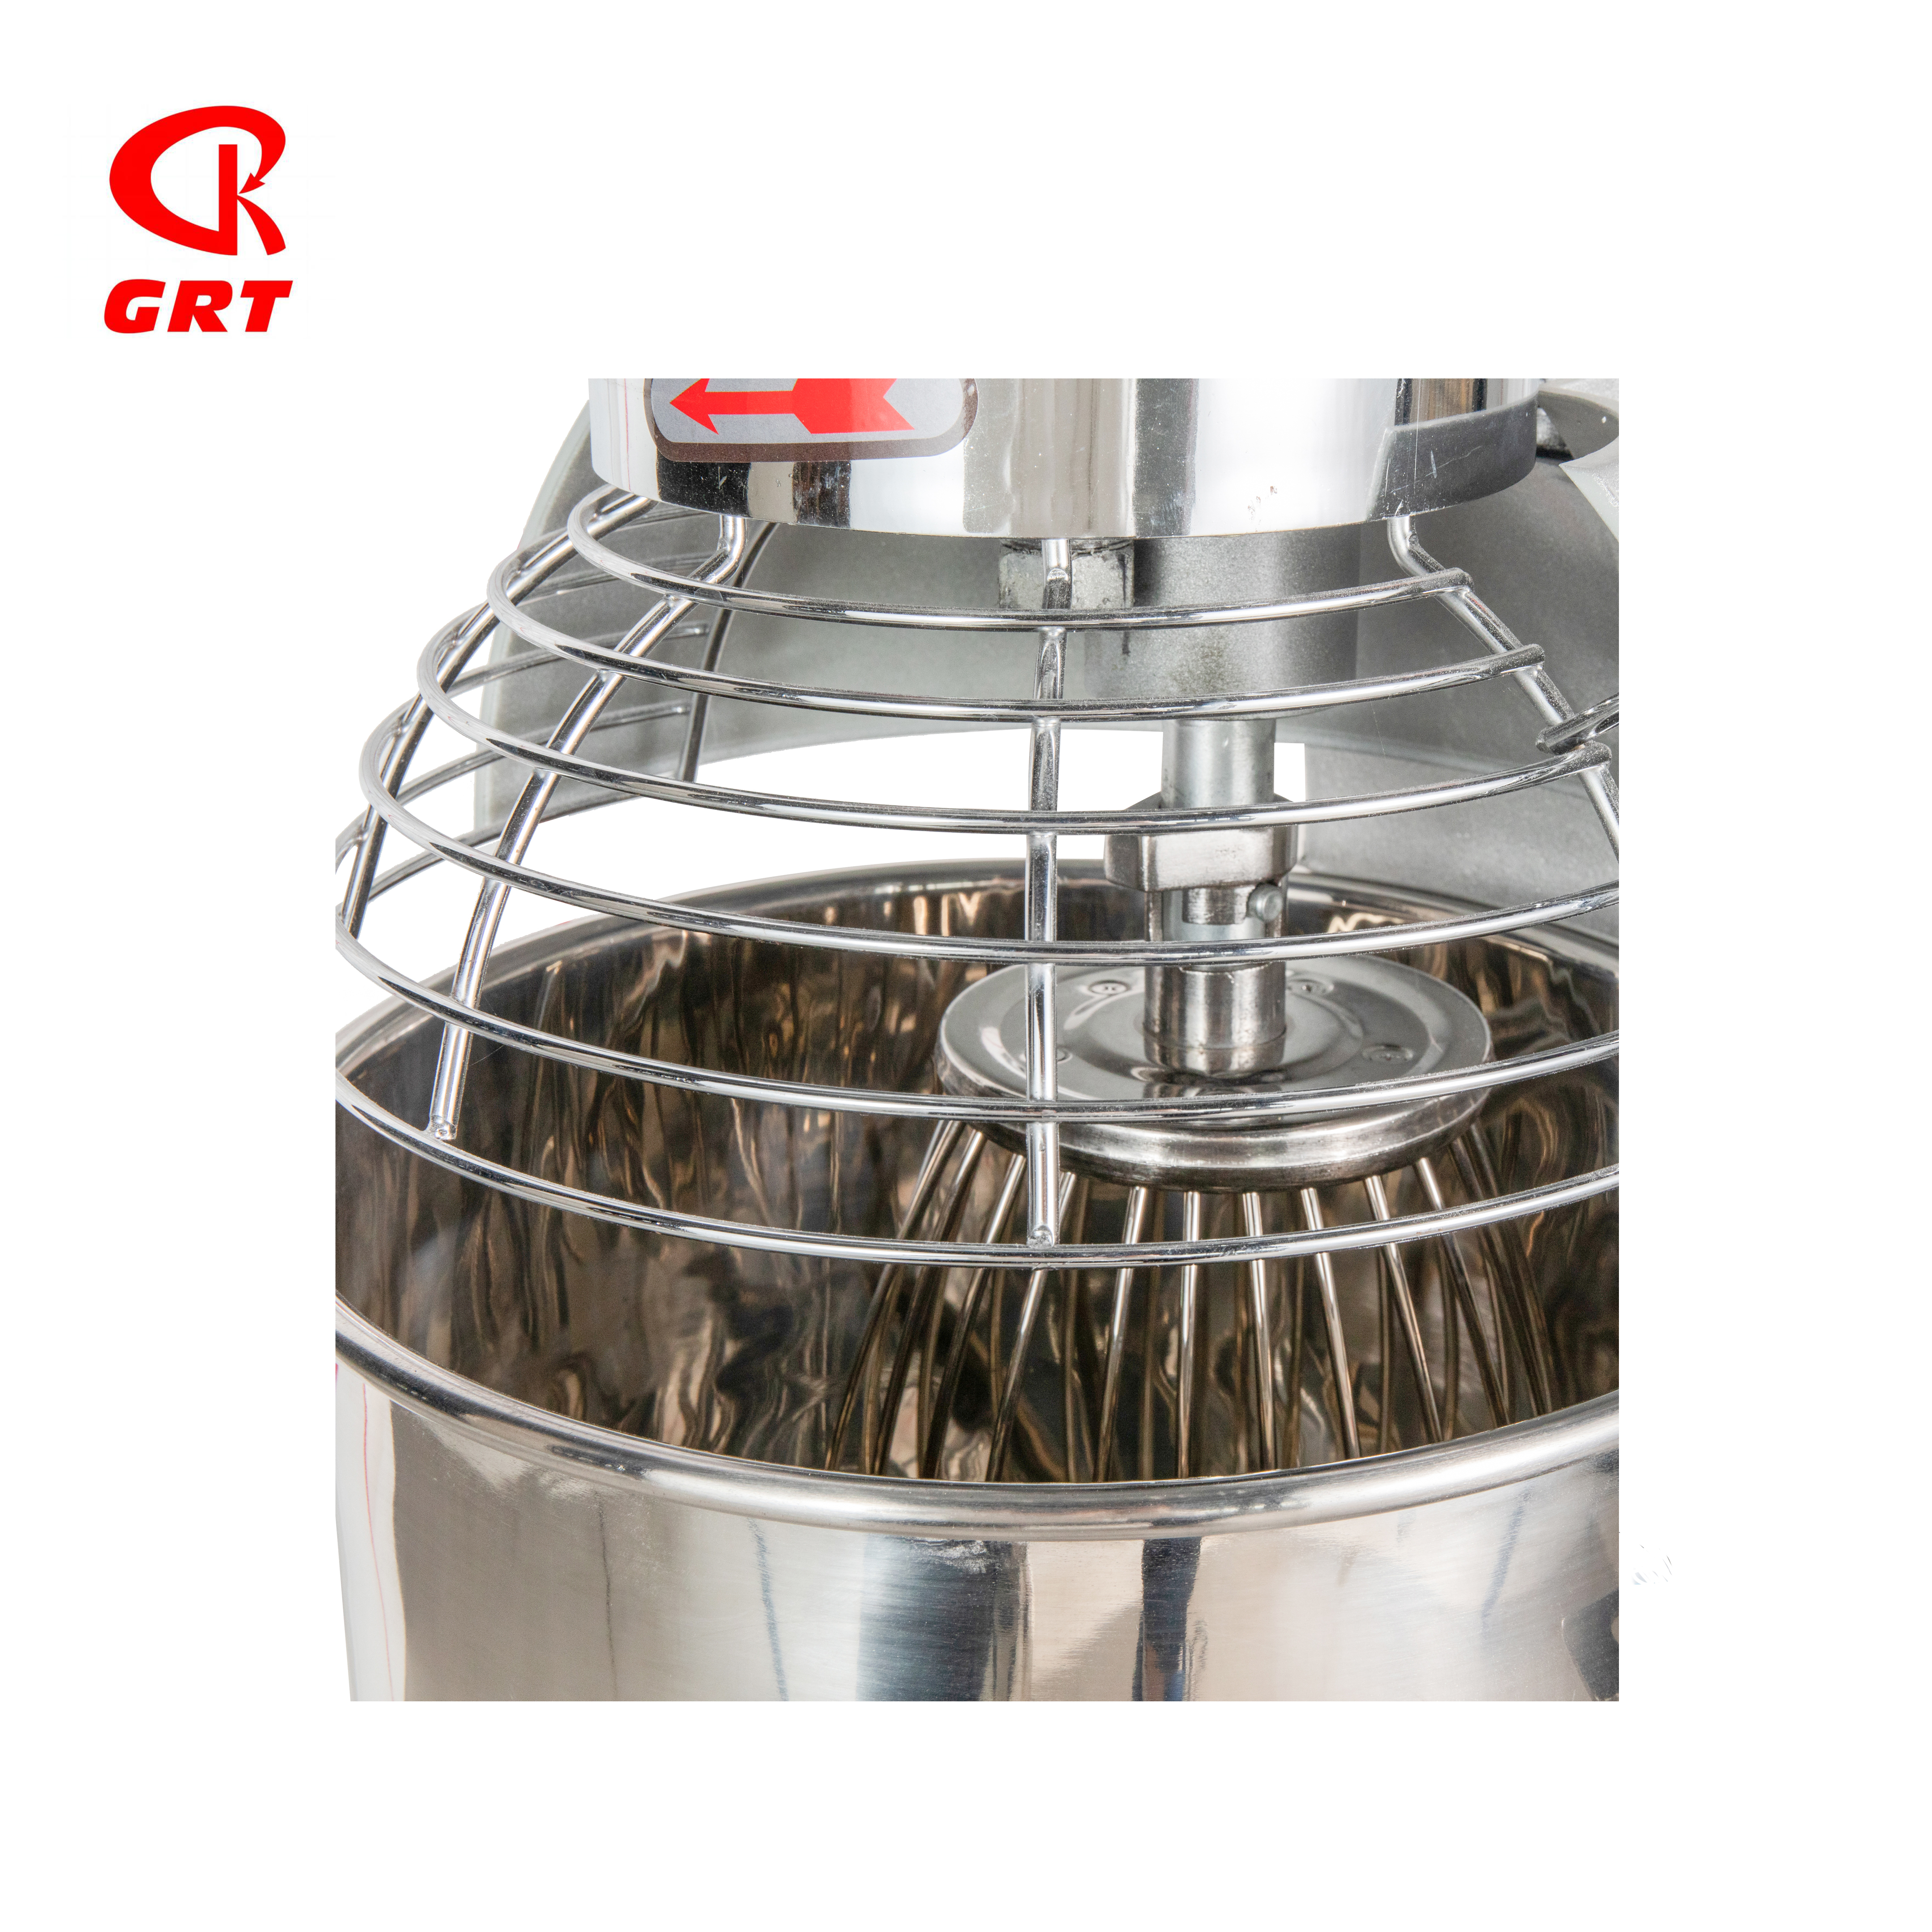 GRT-B20 Commercial Planetary Stand Mixer Planetary Food Mixer 20 Litre